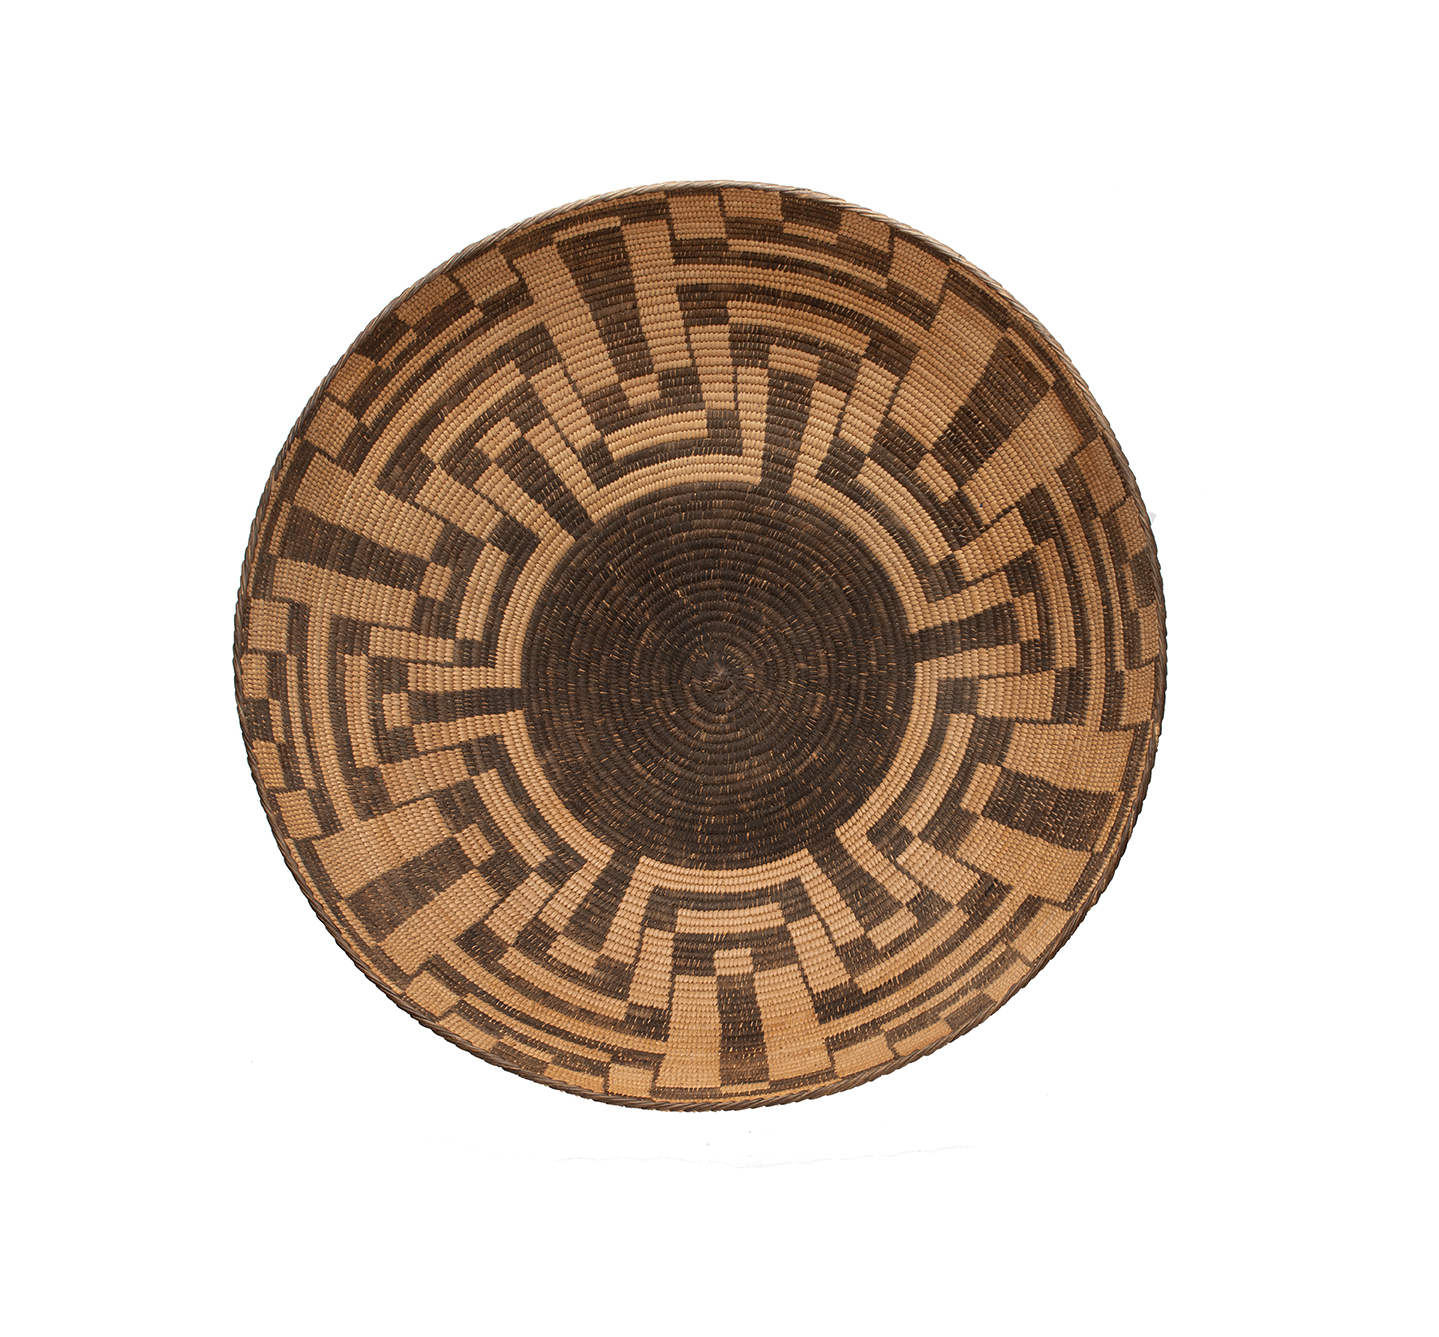 A round, woven basket with intricate geometric patterns in brown and tan colors, viewed from above.